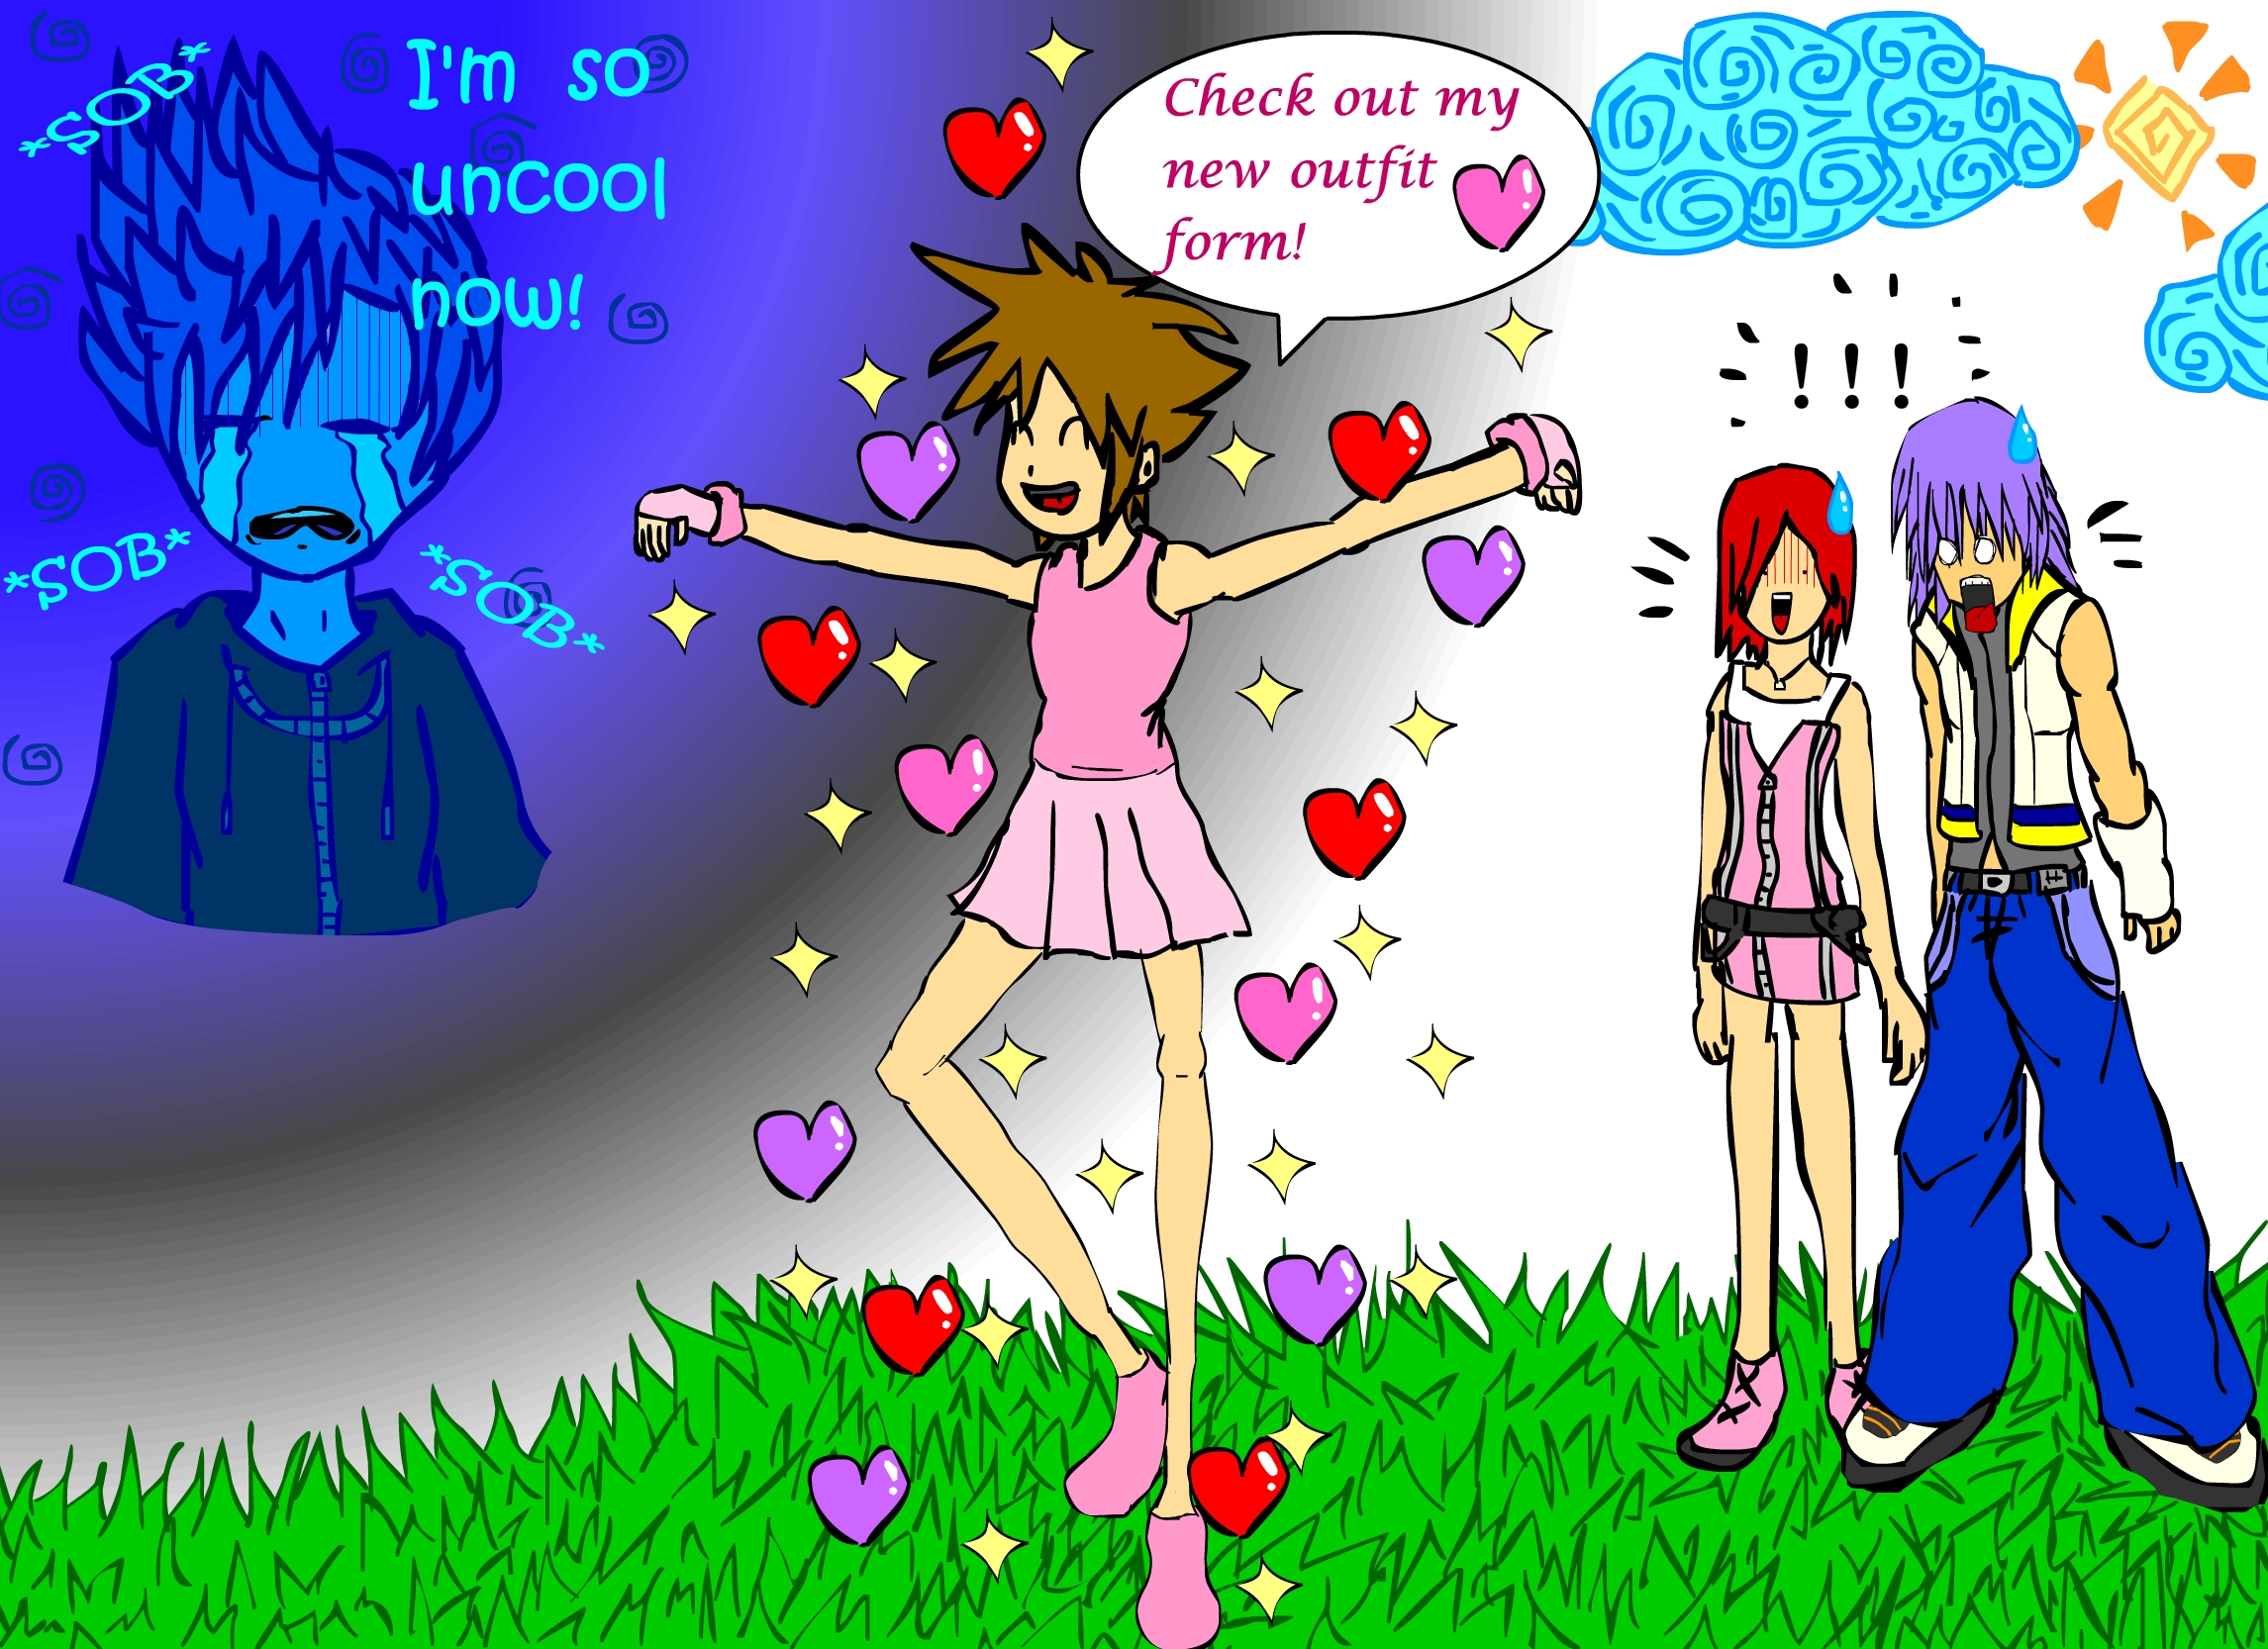 Concept Art for Avatar X Kingdom Hearts Fanfic by Coraline15 on DeviantArt